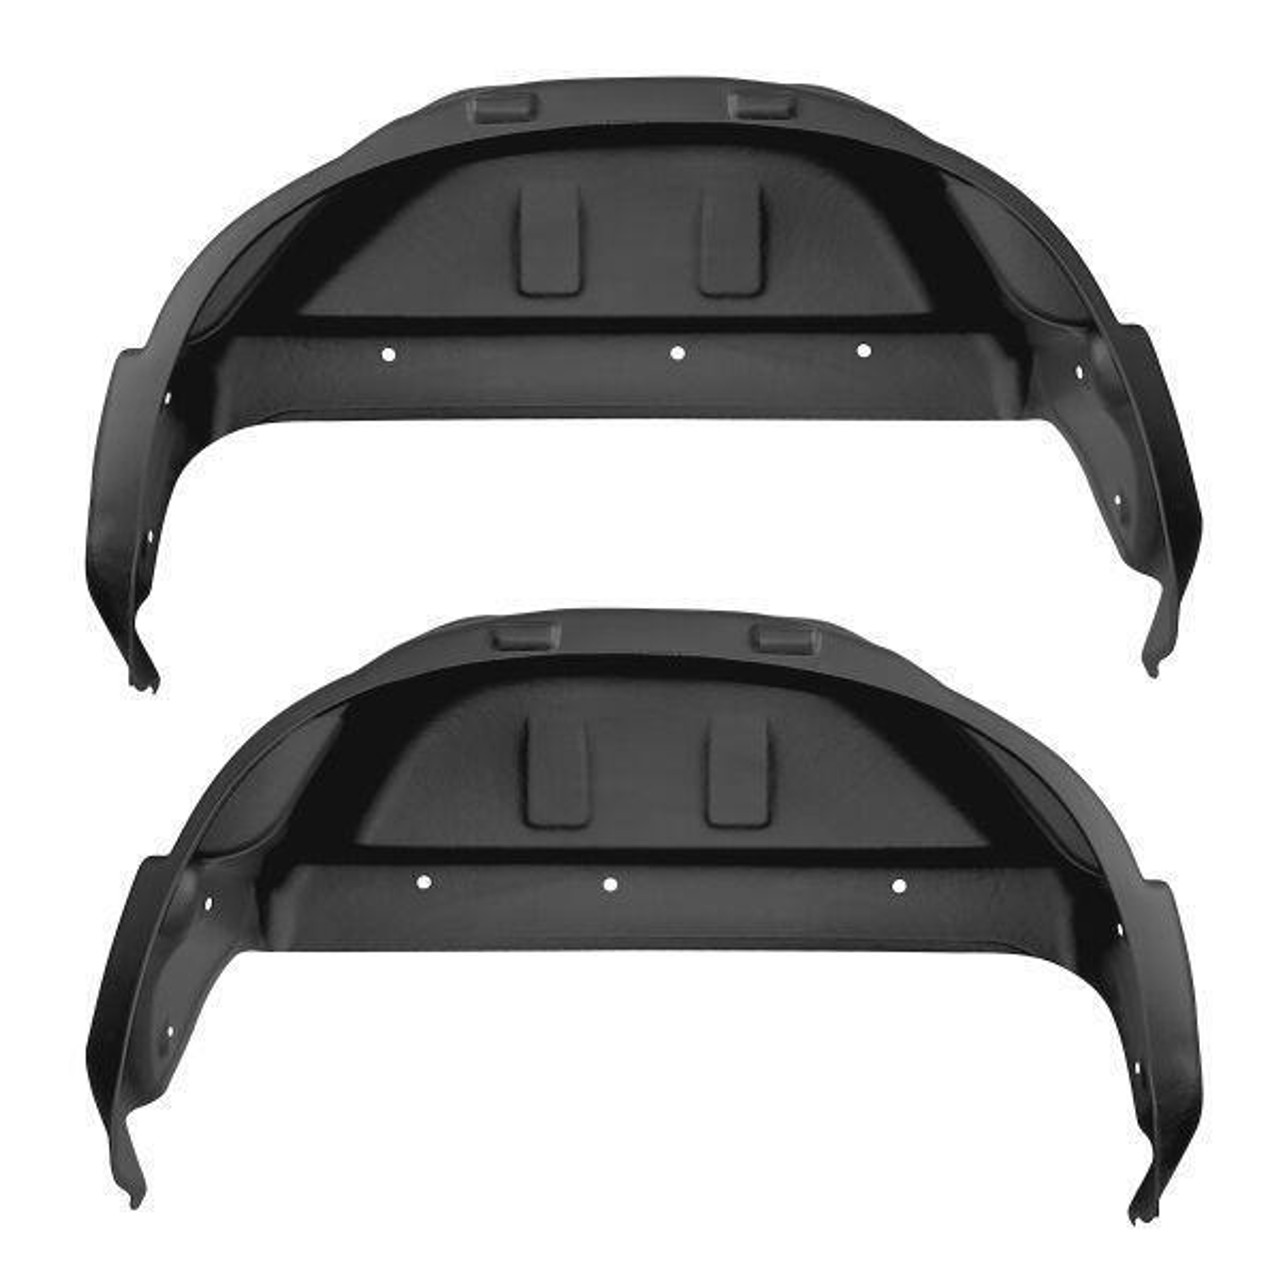 HUSKY LINERS REAR WHEEL WELL COVER GUARD FOR 20-24 CHEVY SILVERADO 2500 3500